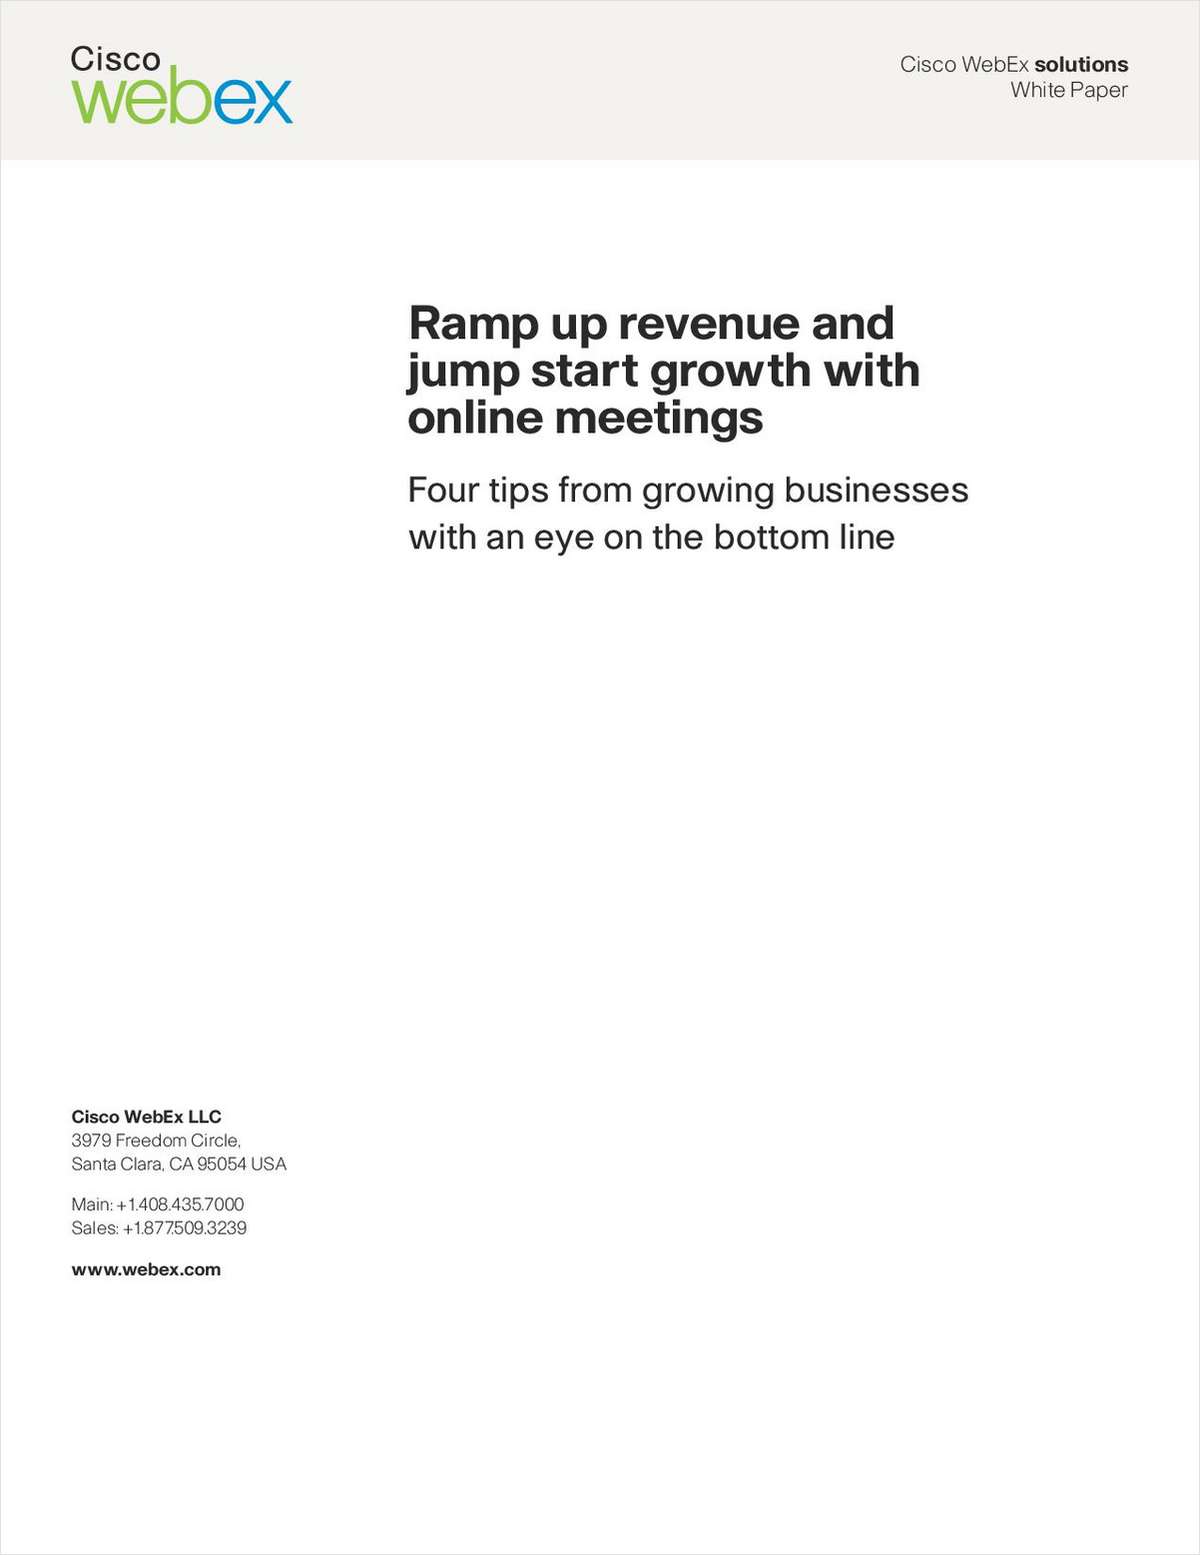 Ramp Up Revenue and Jump Start Growth with Online Meetings